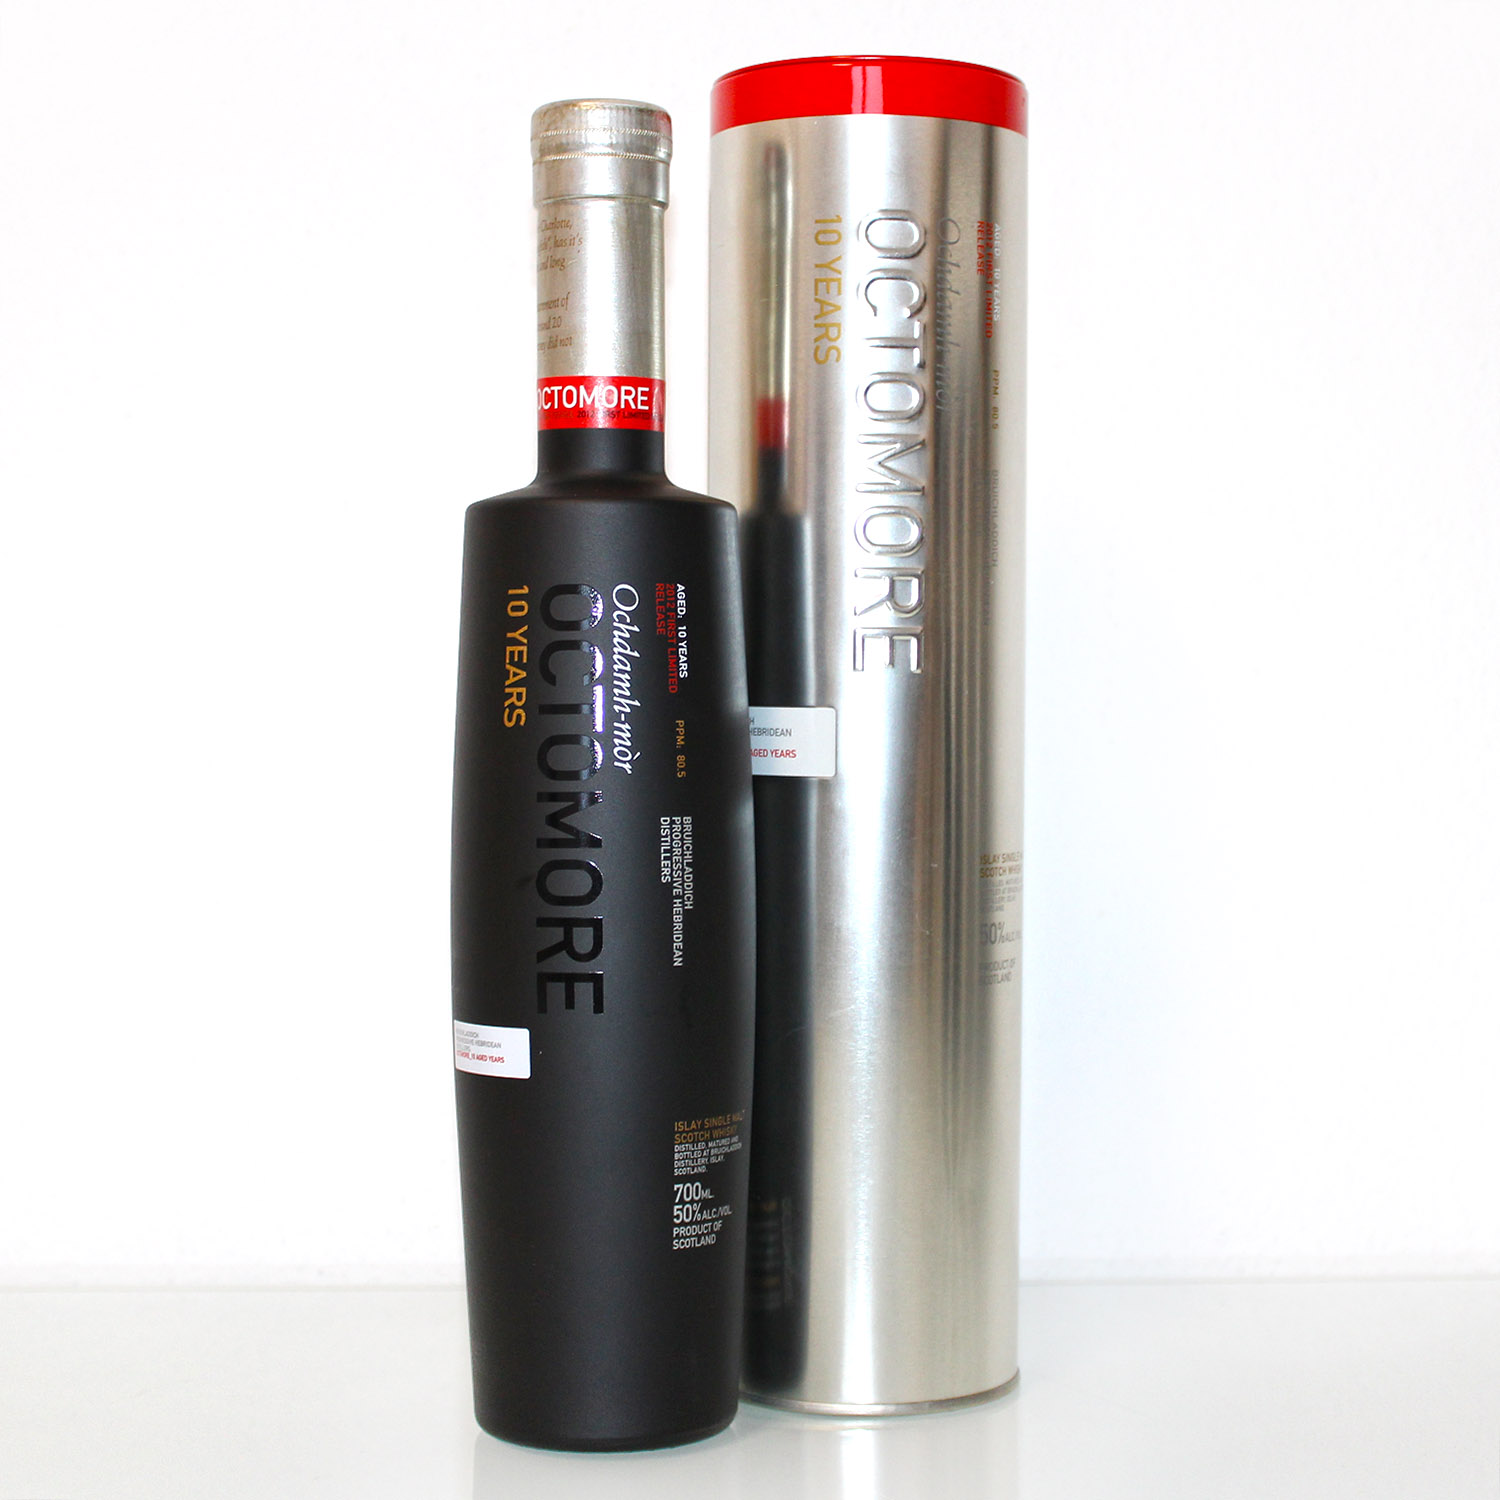 Bruichladdich Octomore 10 Year Old First Limited Release 2012